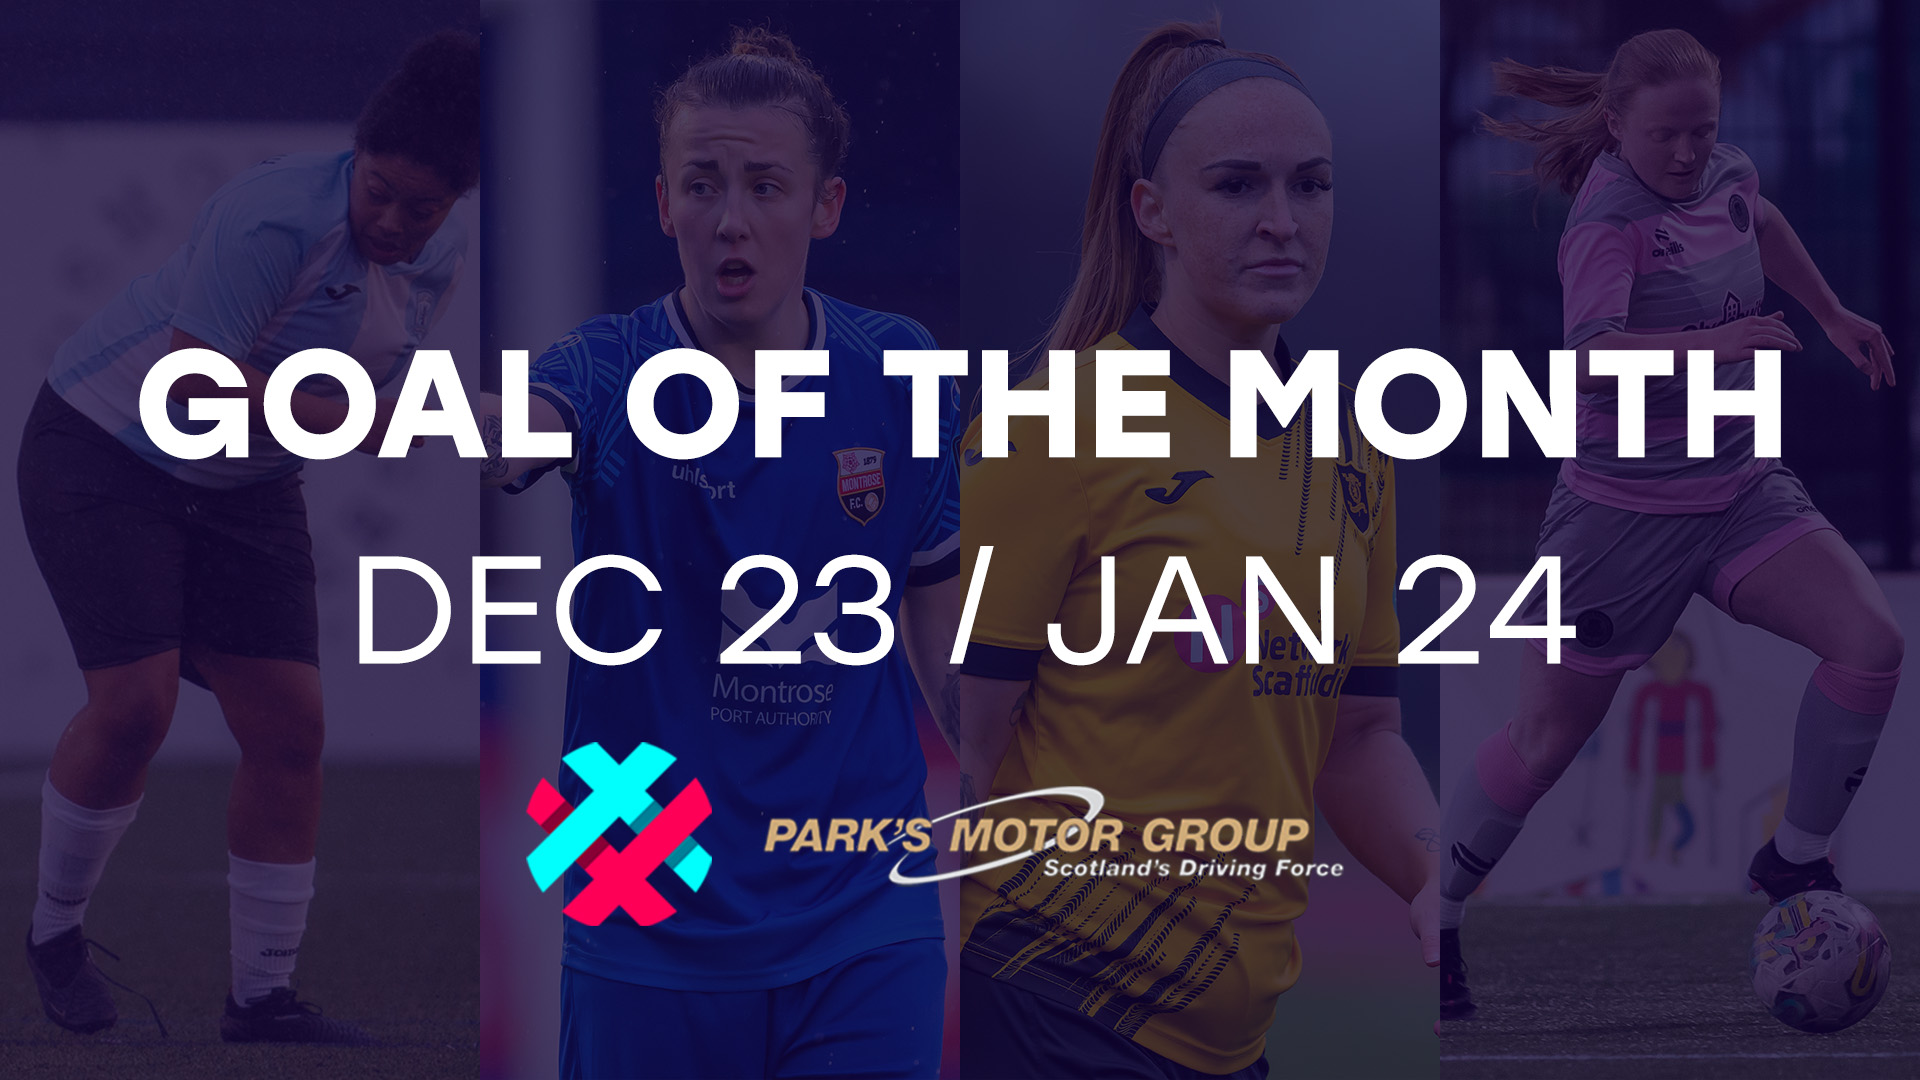 SWPL Goal of the Month, Dec 23 / Jan 24 | Supported by Park’s Motor Group